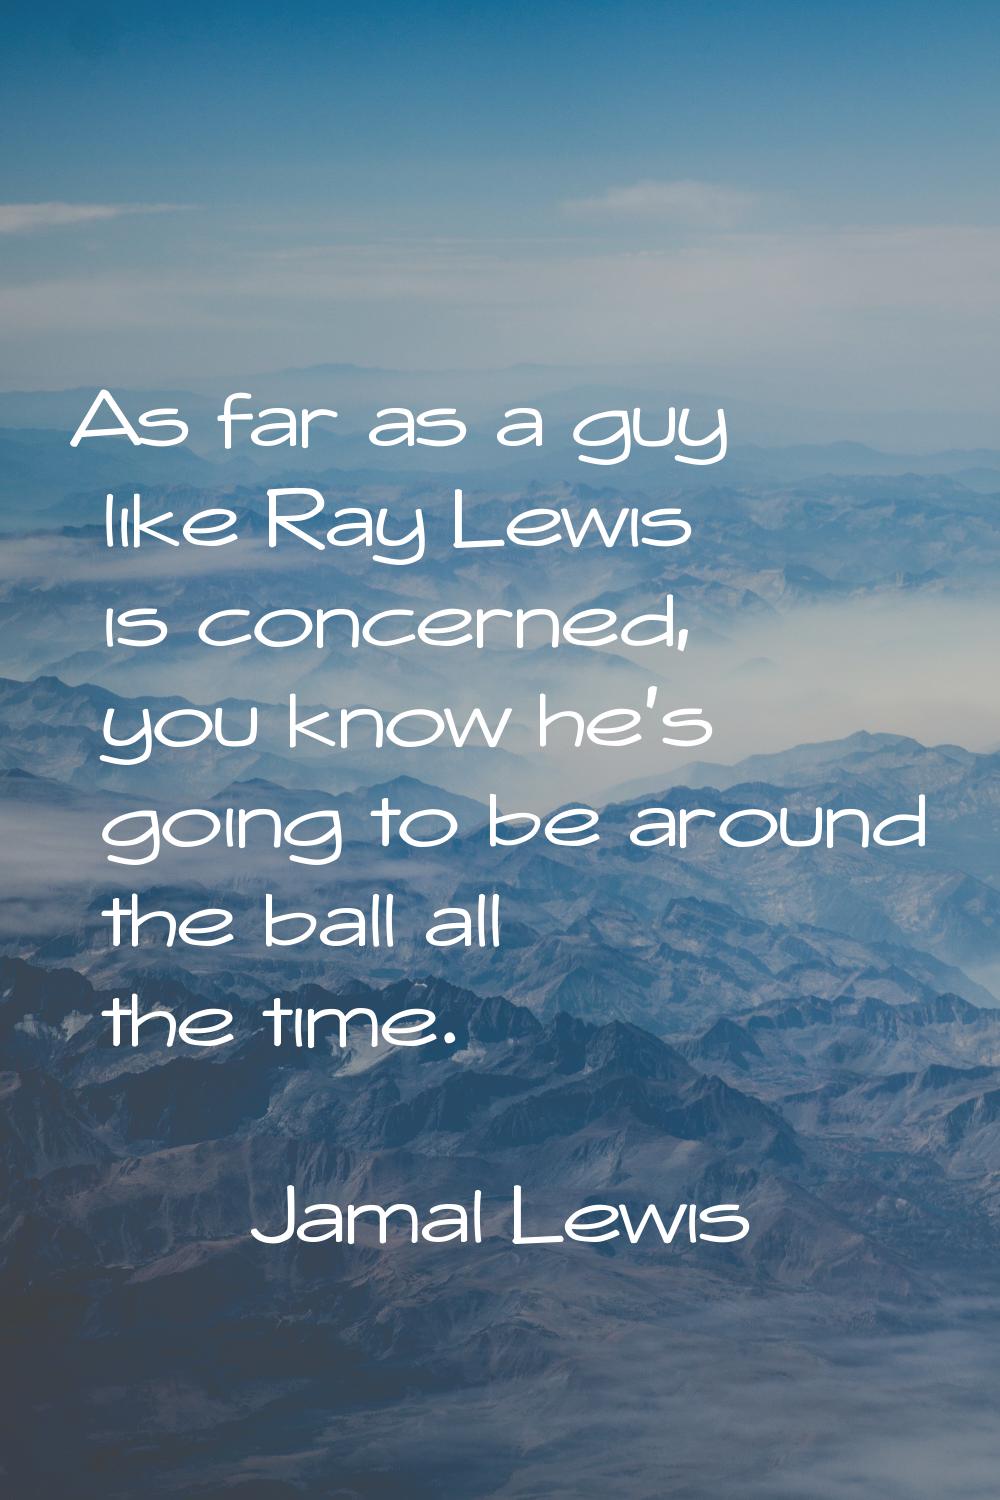 As far as a guy like Ray Lewis is concerned, you know he's going to be around the ball all the time